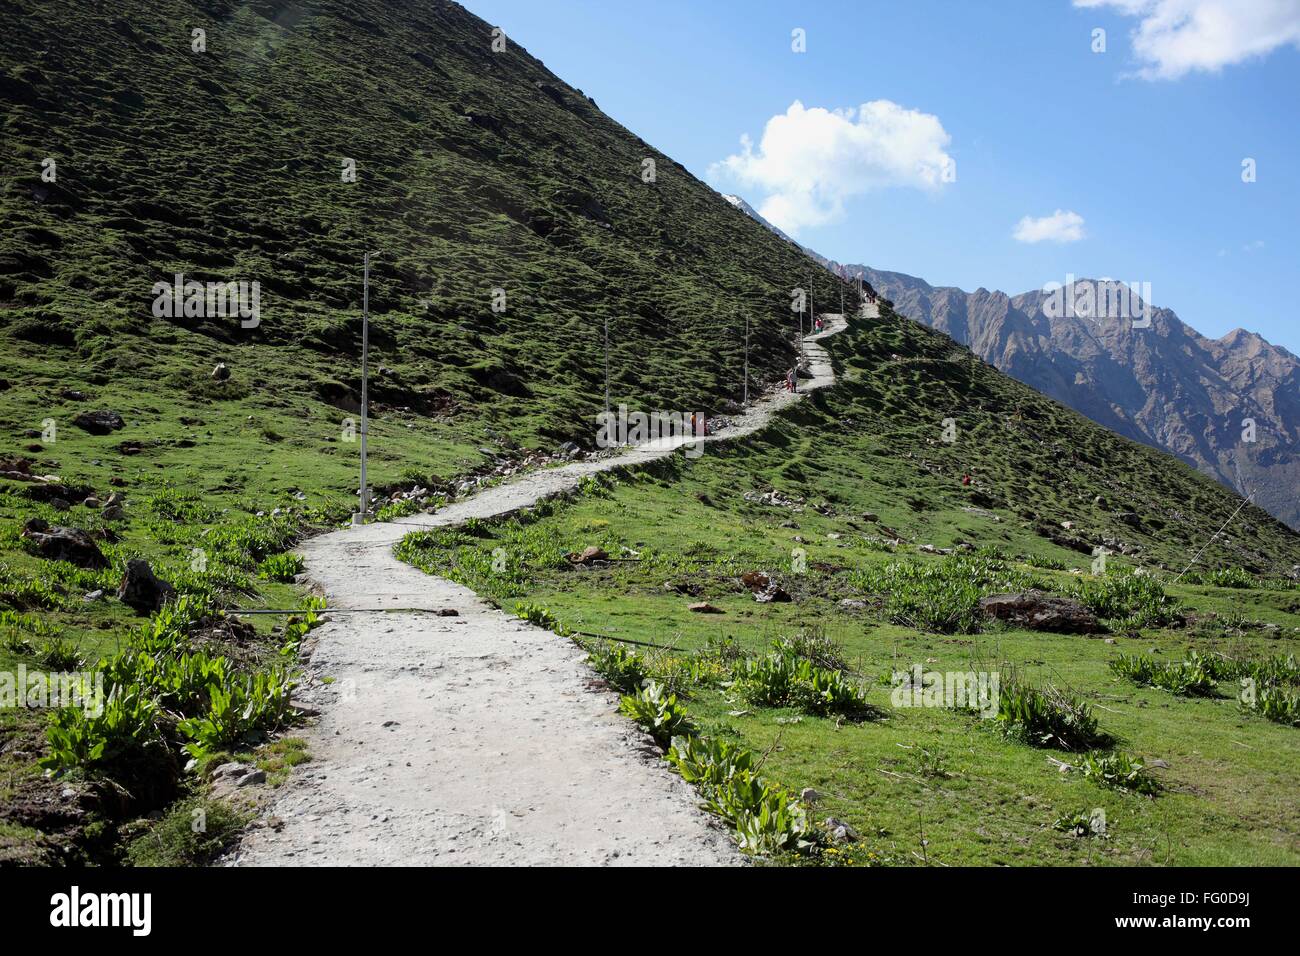 Steep steps on mountain path to the green alpine valley